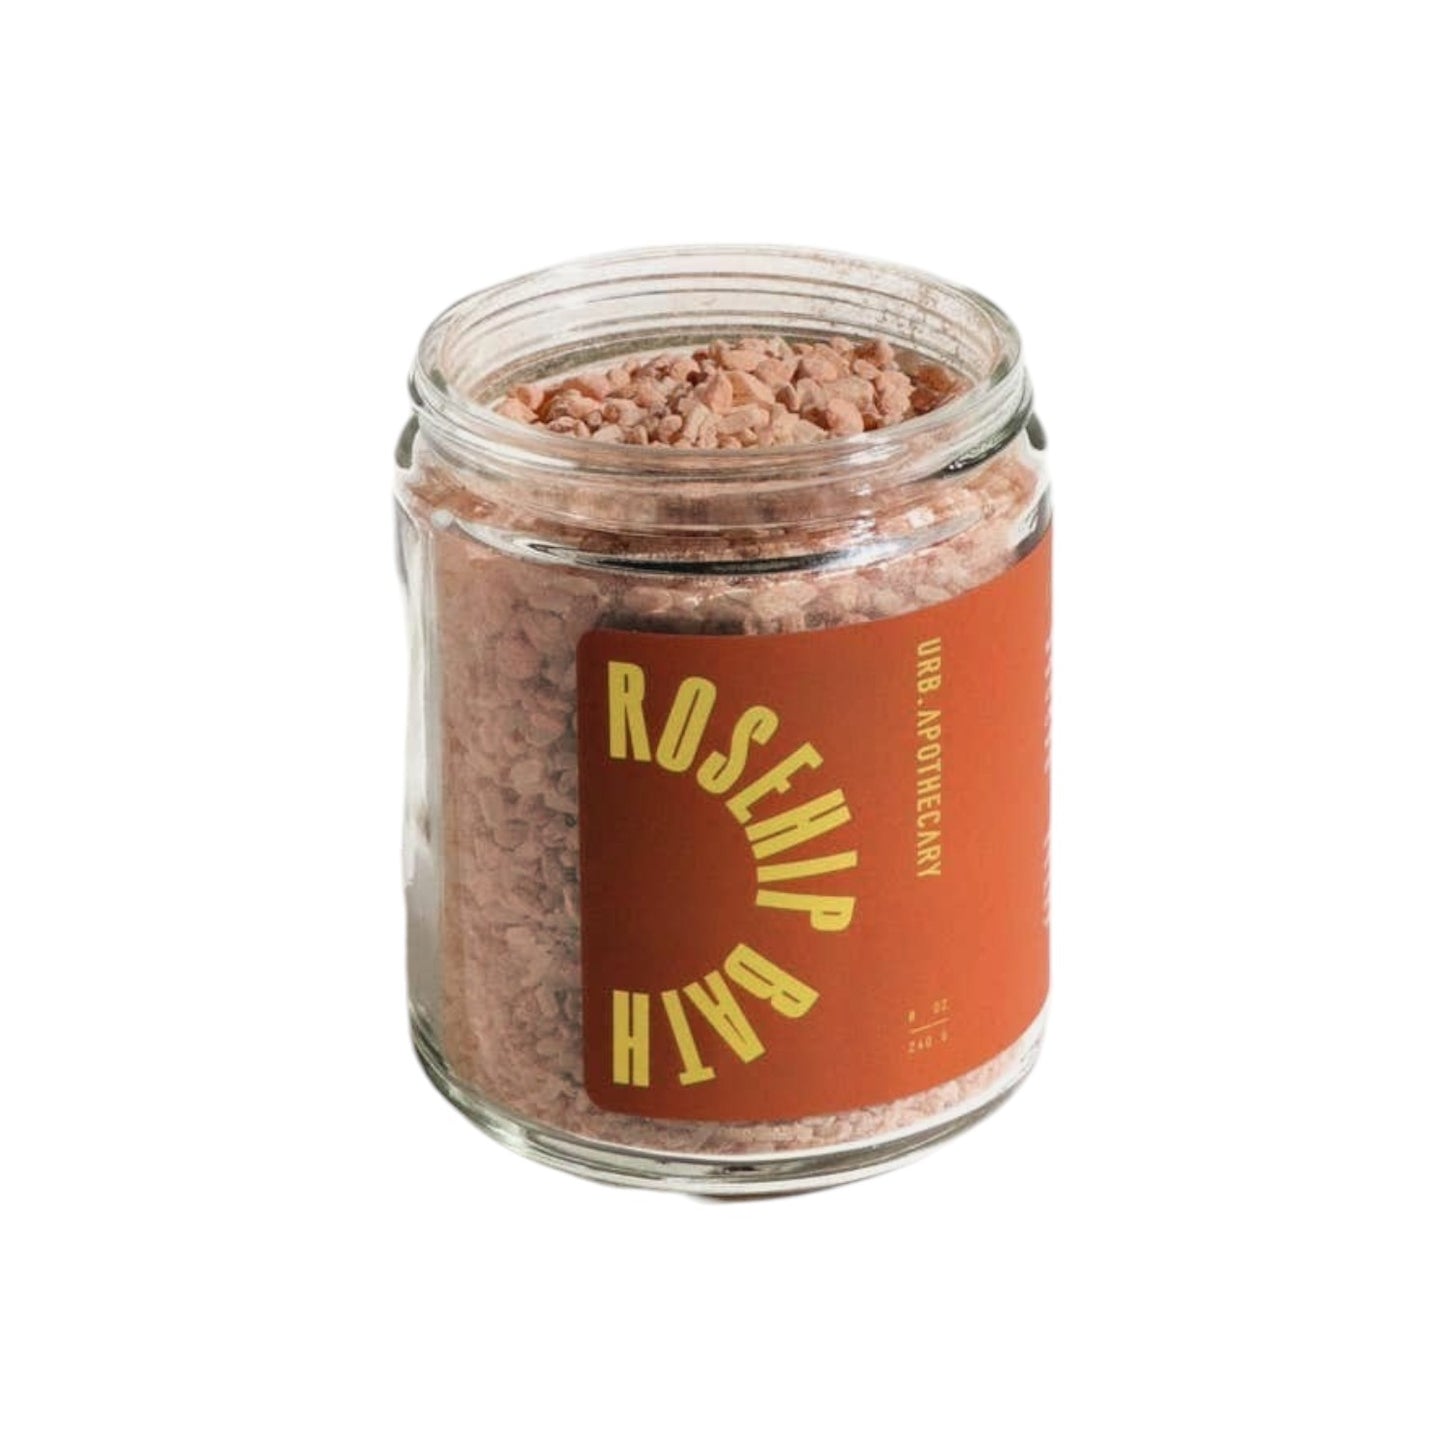 Open jar of the Rosehip Bath Salts from URB.Apothecary